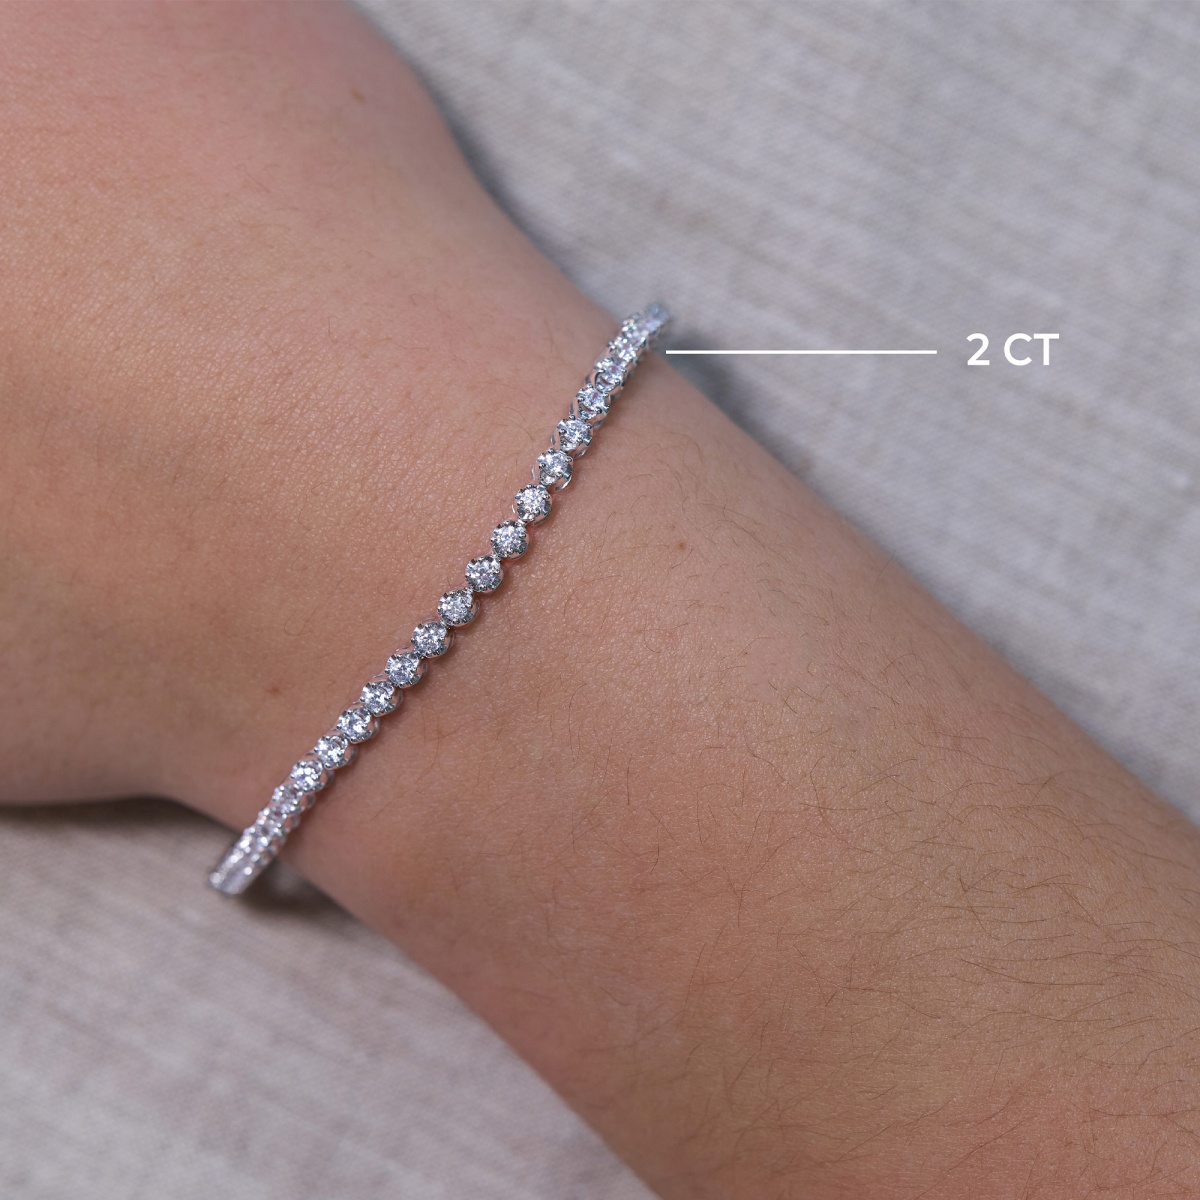 Additional Image 1 for  2 ctw Round Lab Grown Diamond Petite Tennis Bracelet - 7 Inches